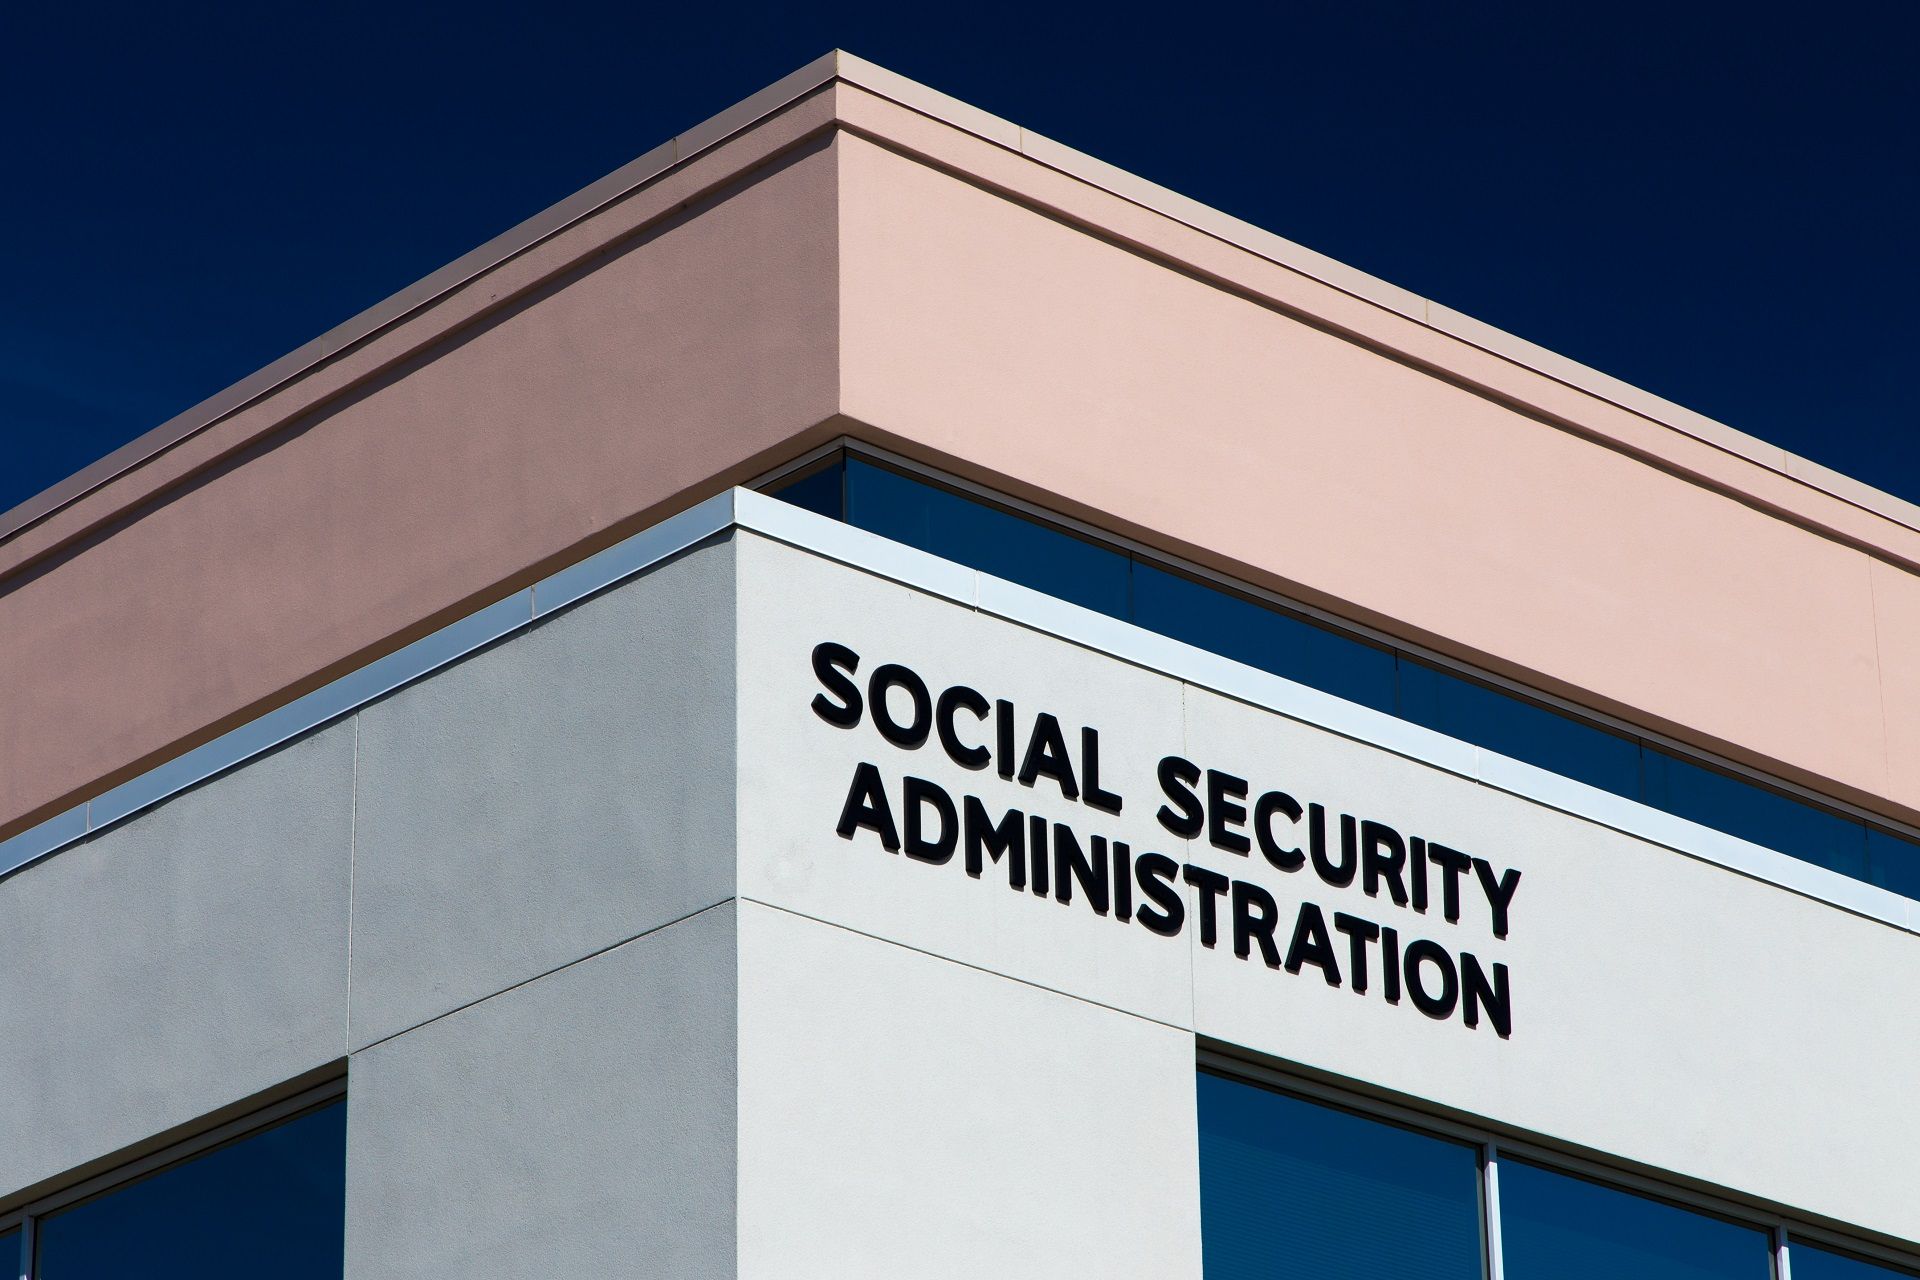 Social security experts